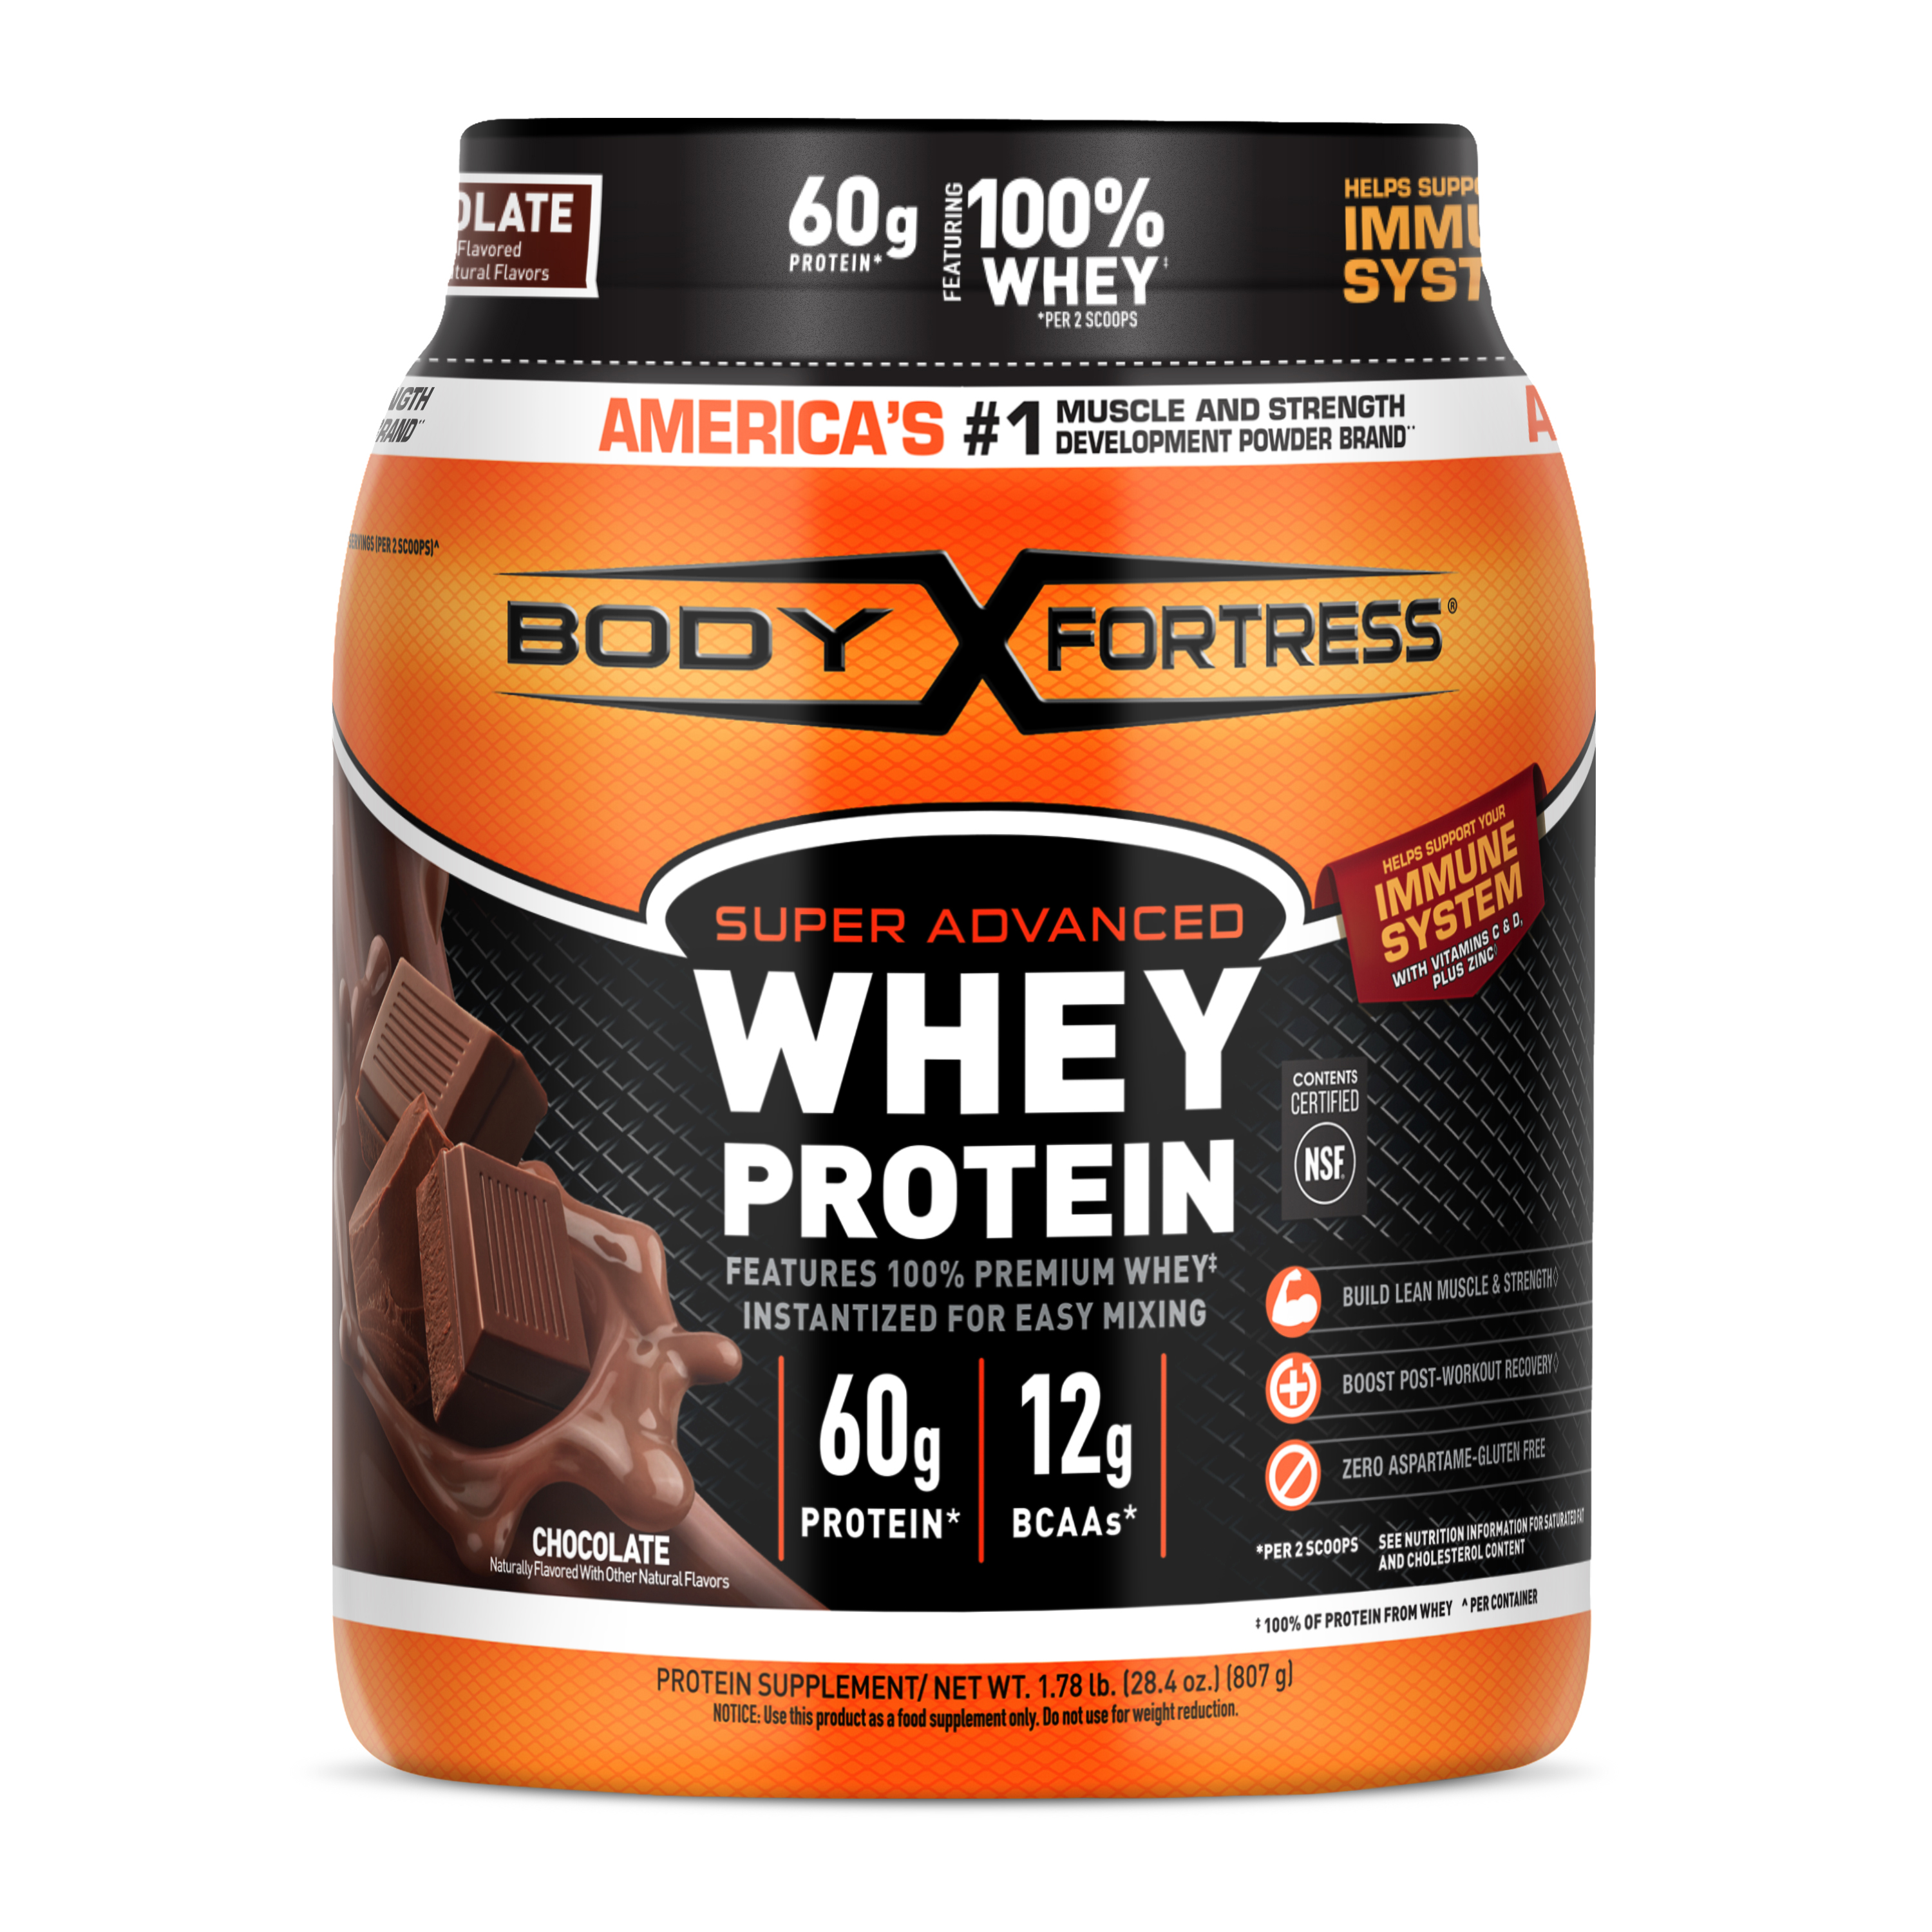 Body Fortress 100% Whey, Premium Protein Powder, Chocolate, 1.78lbs (Packaging May Vary) - image 1 of 7